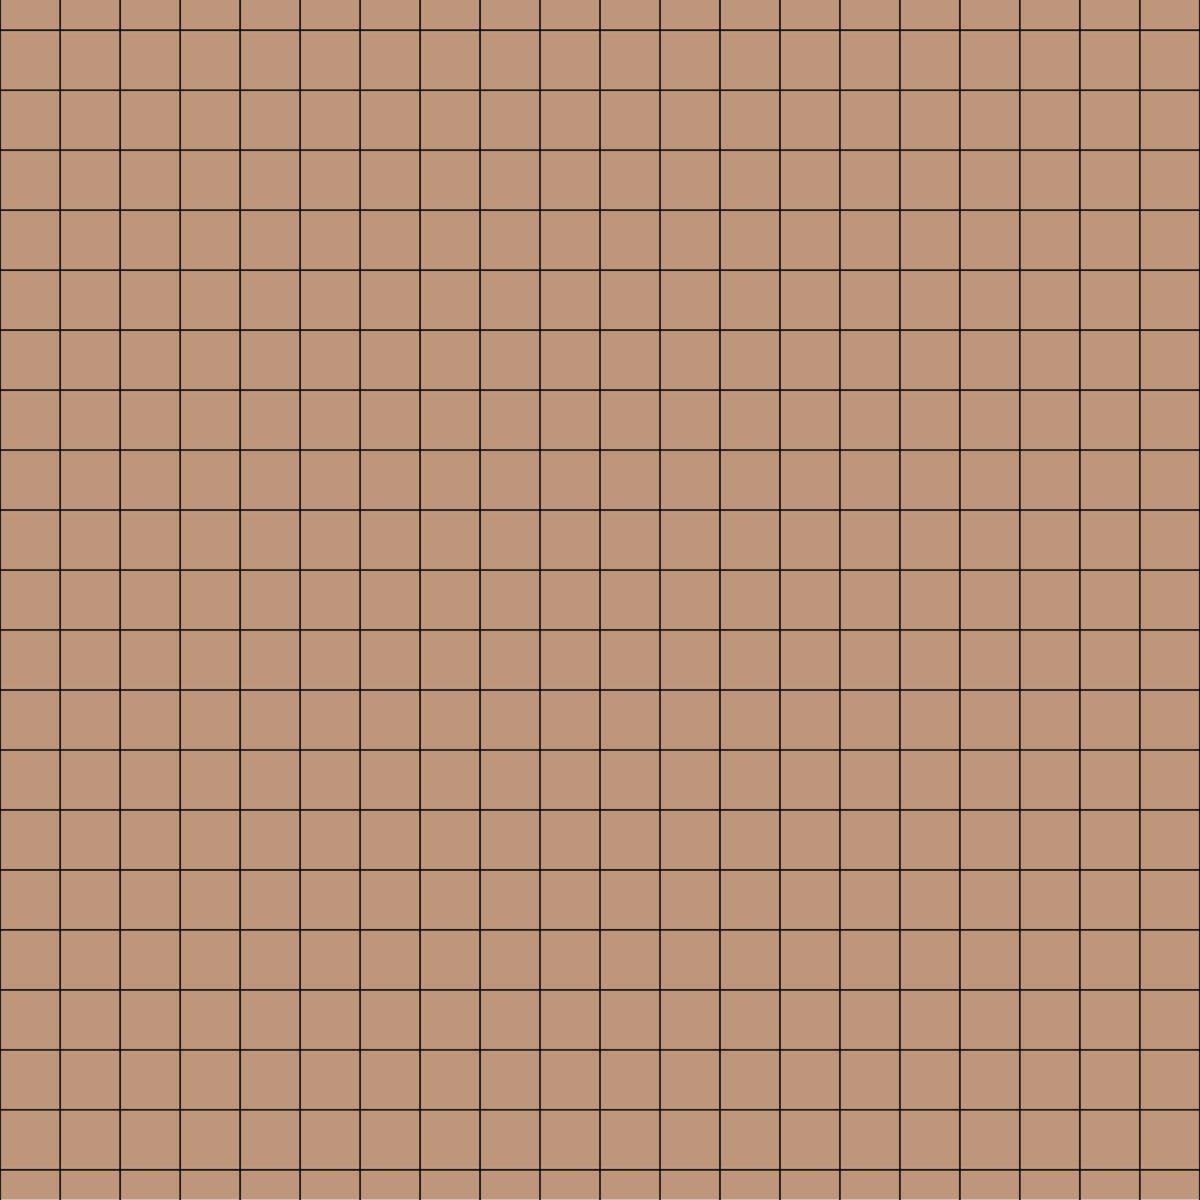 A brown background with a grid pattern, great for use as a wallpaper or in various designs. Tags: Paper Grid, Desain Banner, Grid wallpaper, Aesthetic pastel wallpaper, Aesthetic, Minimalist - Grid